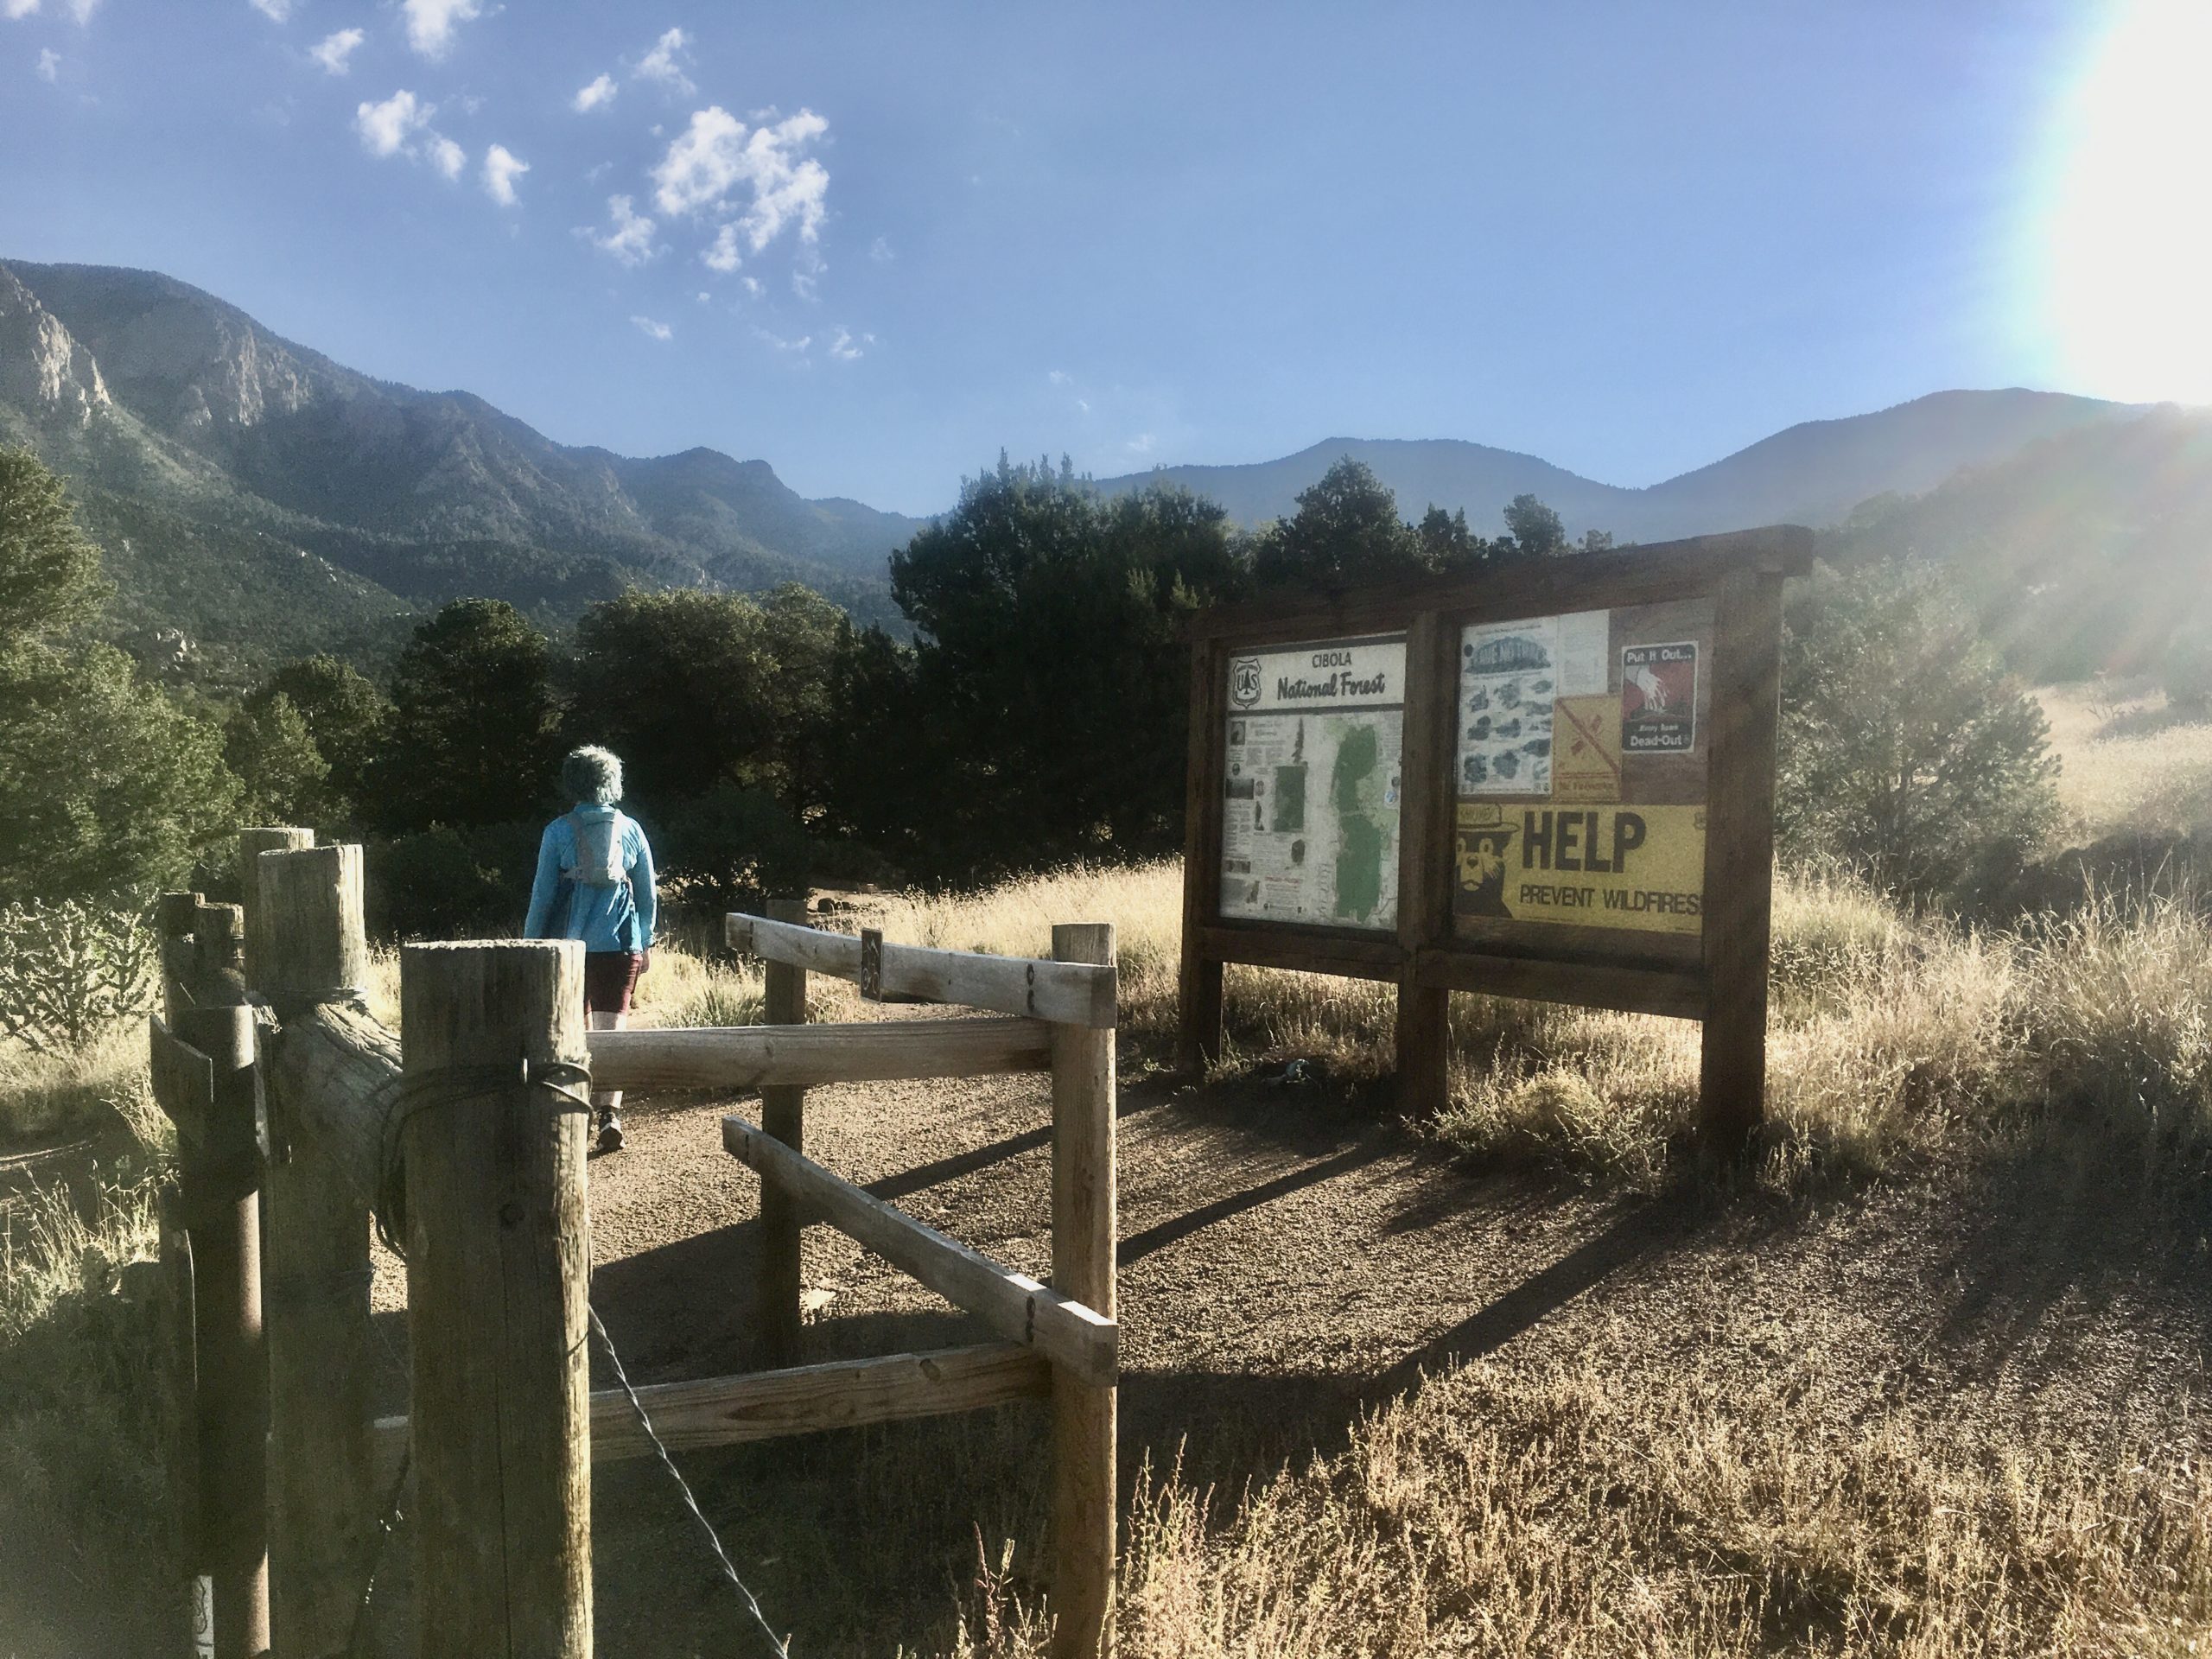 Our Pino Trail Adventure Begins